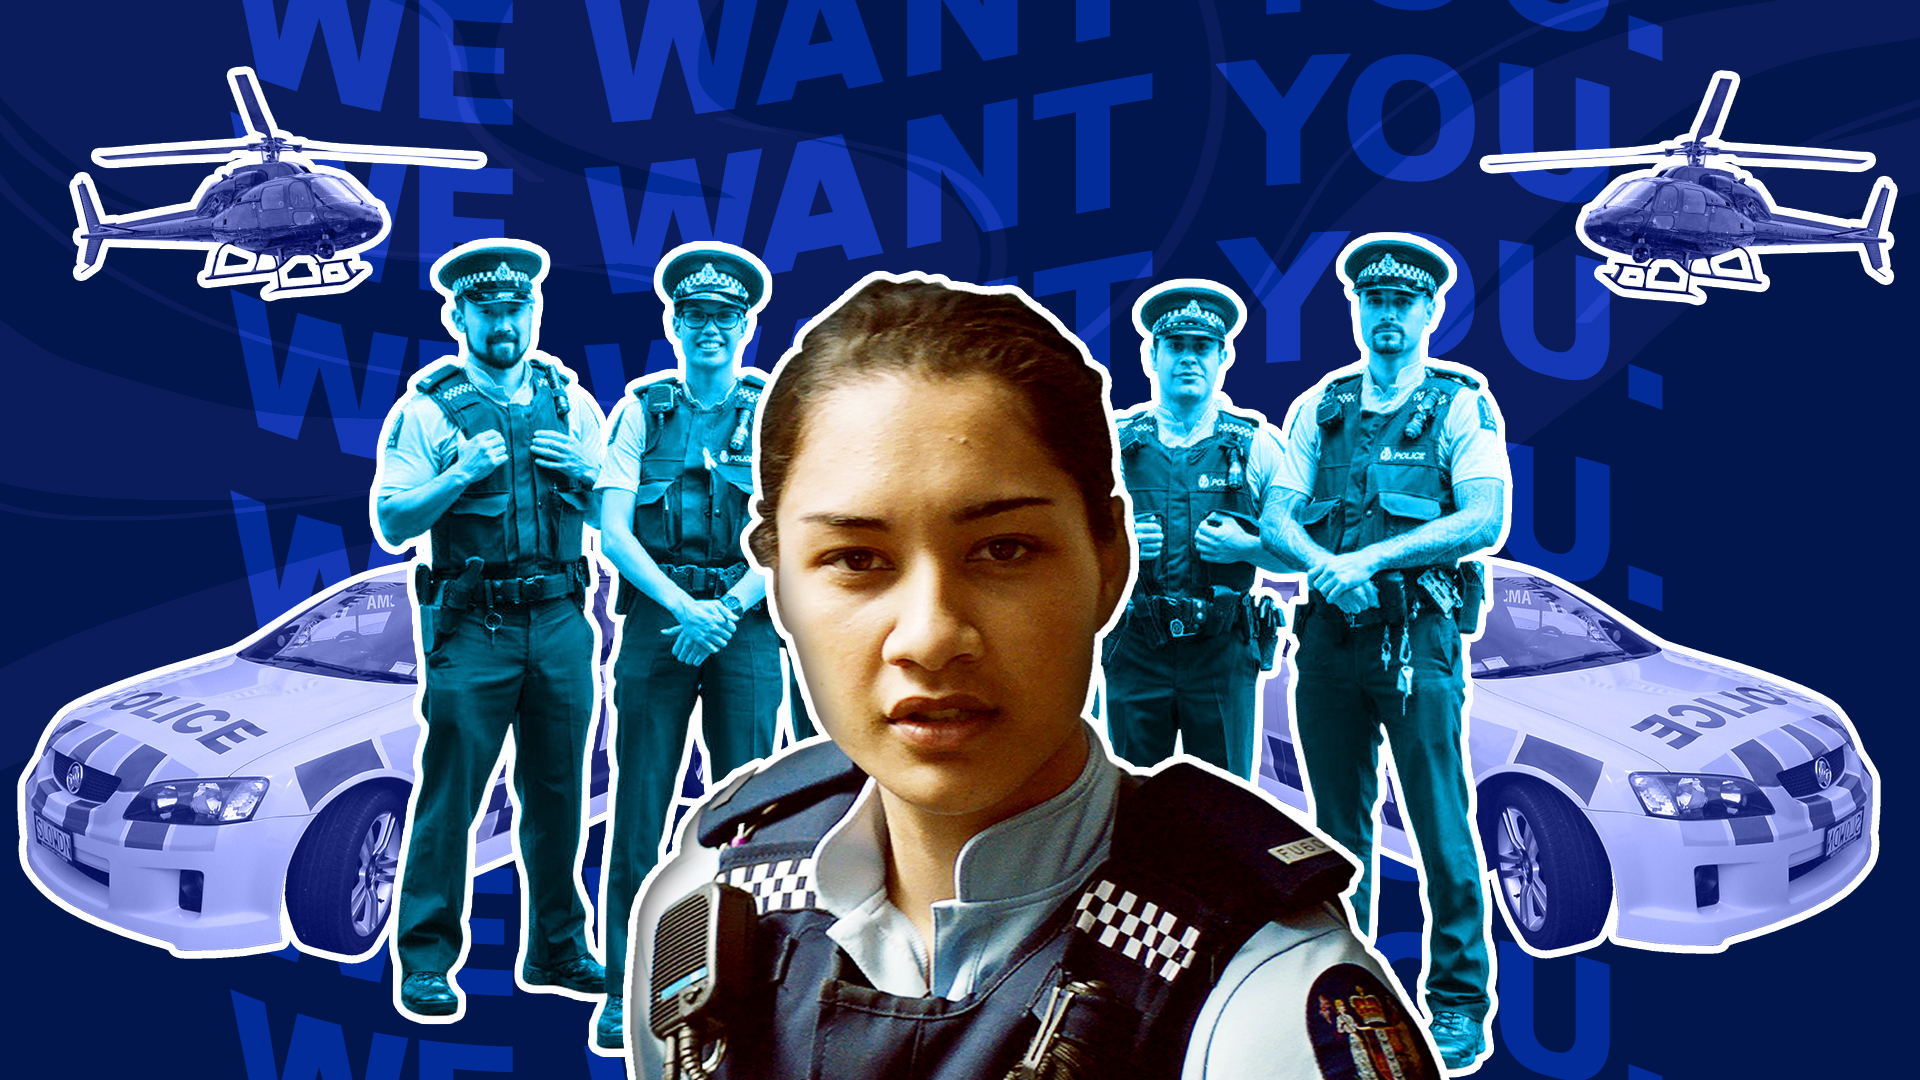 New Zealand, police, recruitment, ad, video, LOL